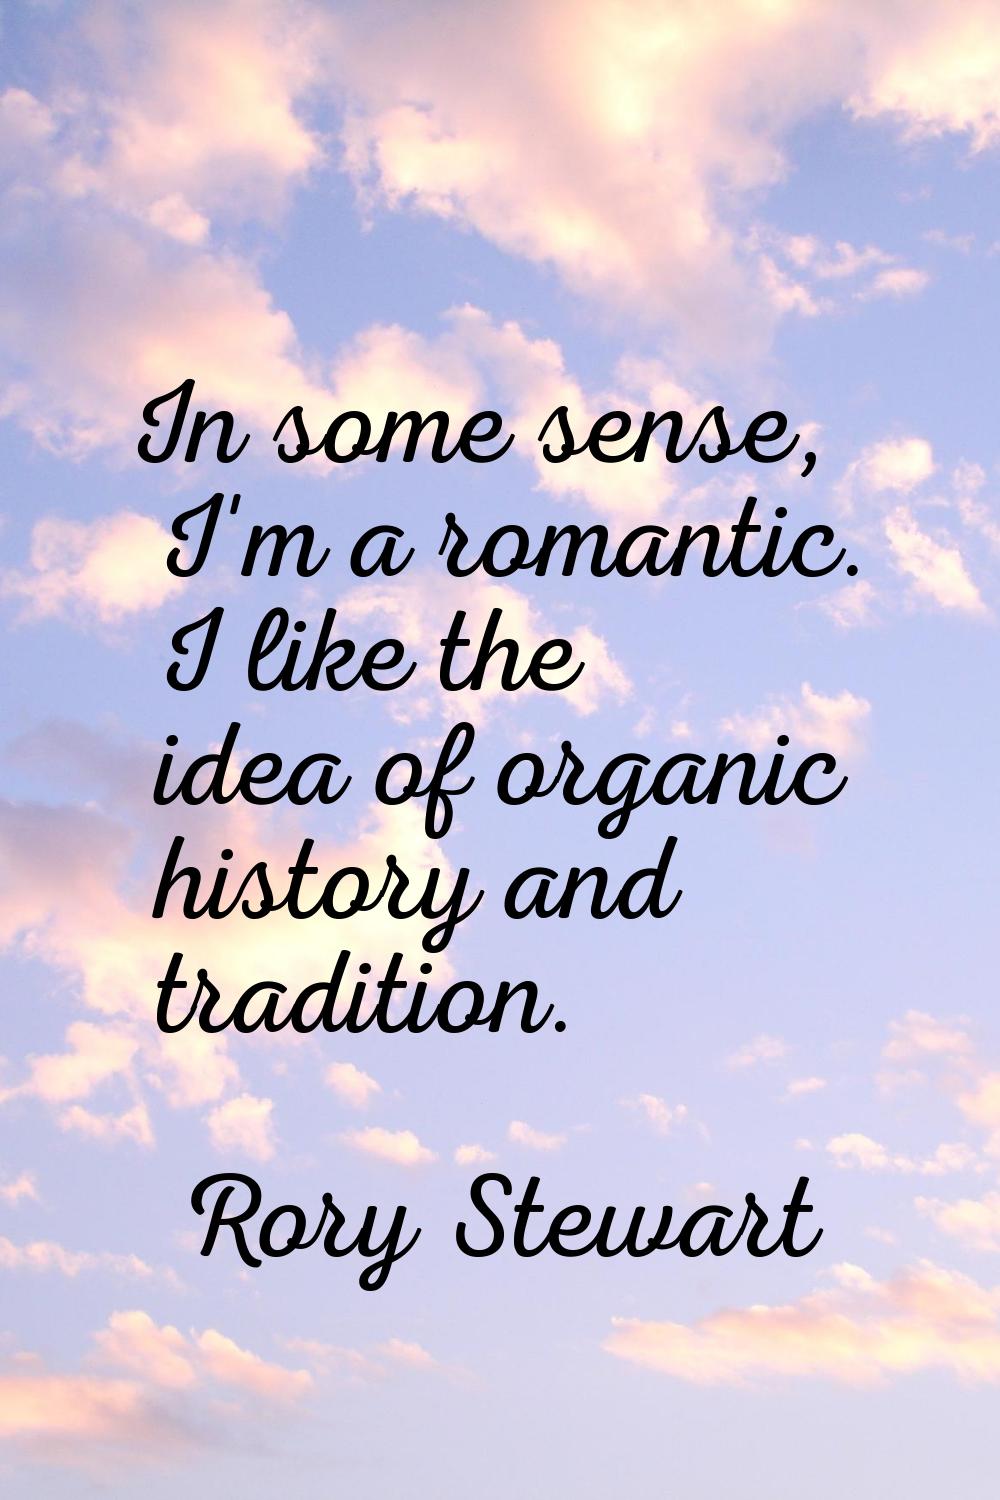 In some sense, I'm a romantic. I like the idea of organic history and tradition.